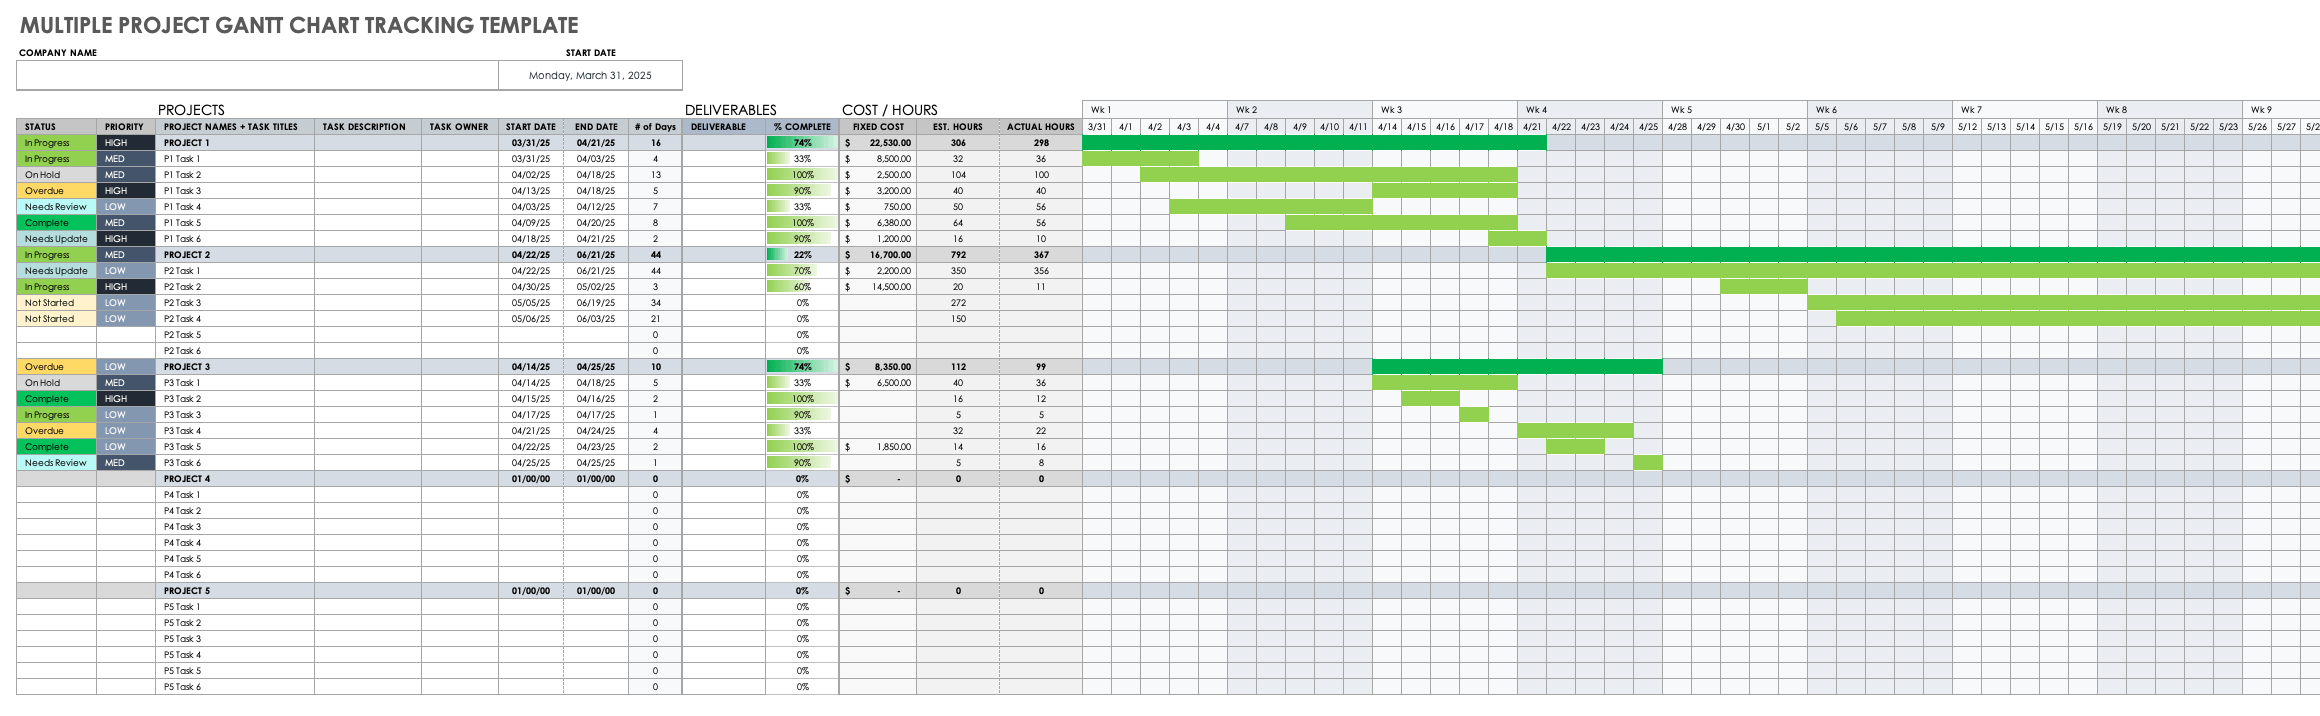 Multiple Project Gantt Chart Tracking Template